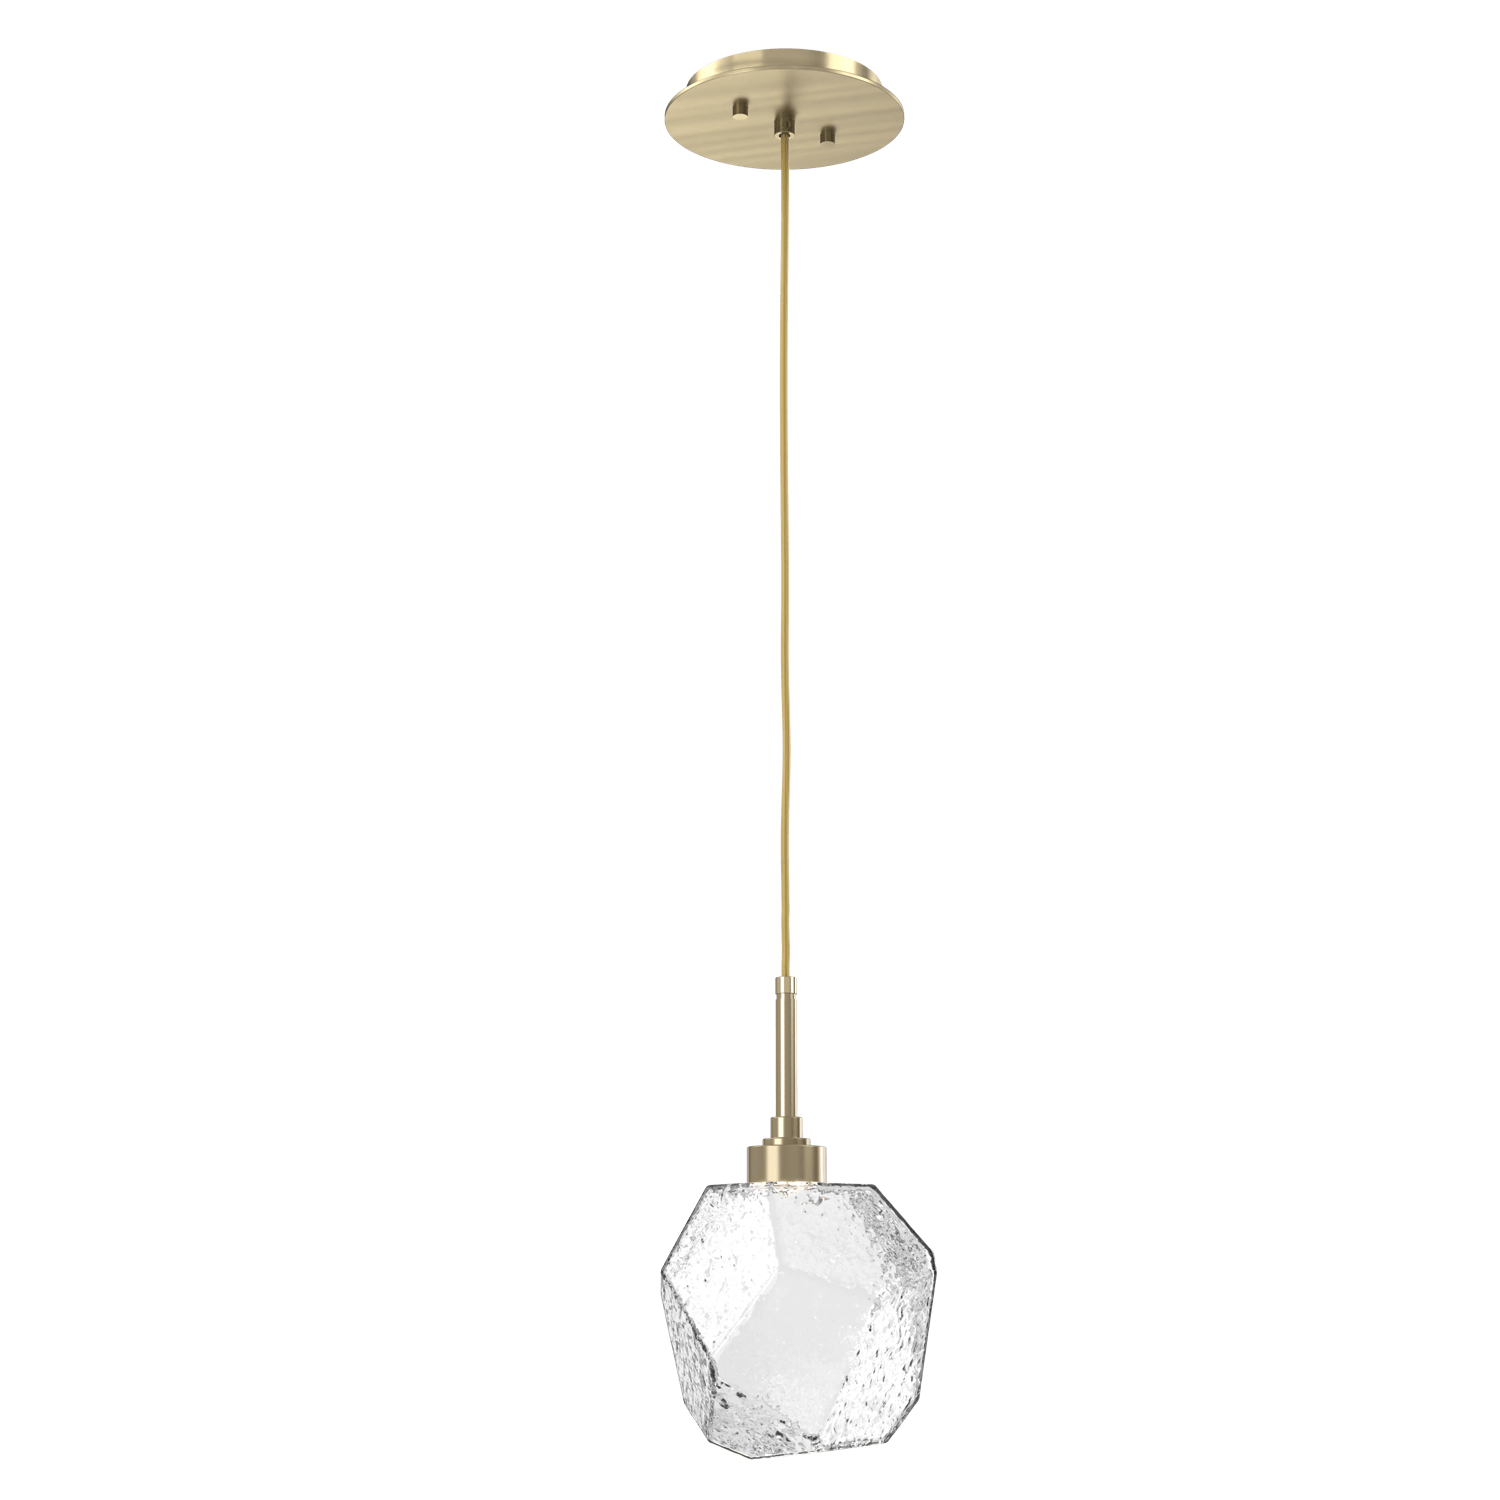 LAB0039-01-HB-C-Hammerton-Studio-Gem-pendant-light-with-heritage-brass-finish-and-clear-blown-glass-shades-and-LED-lamping